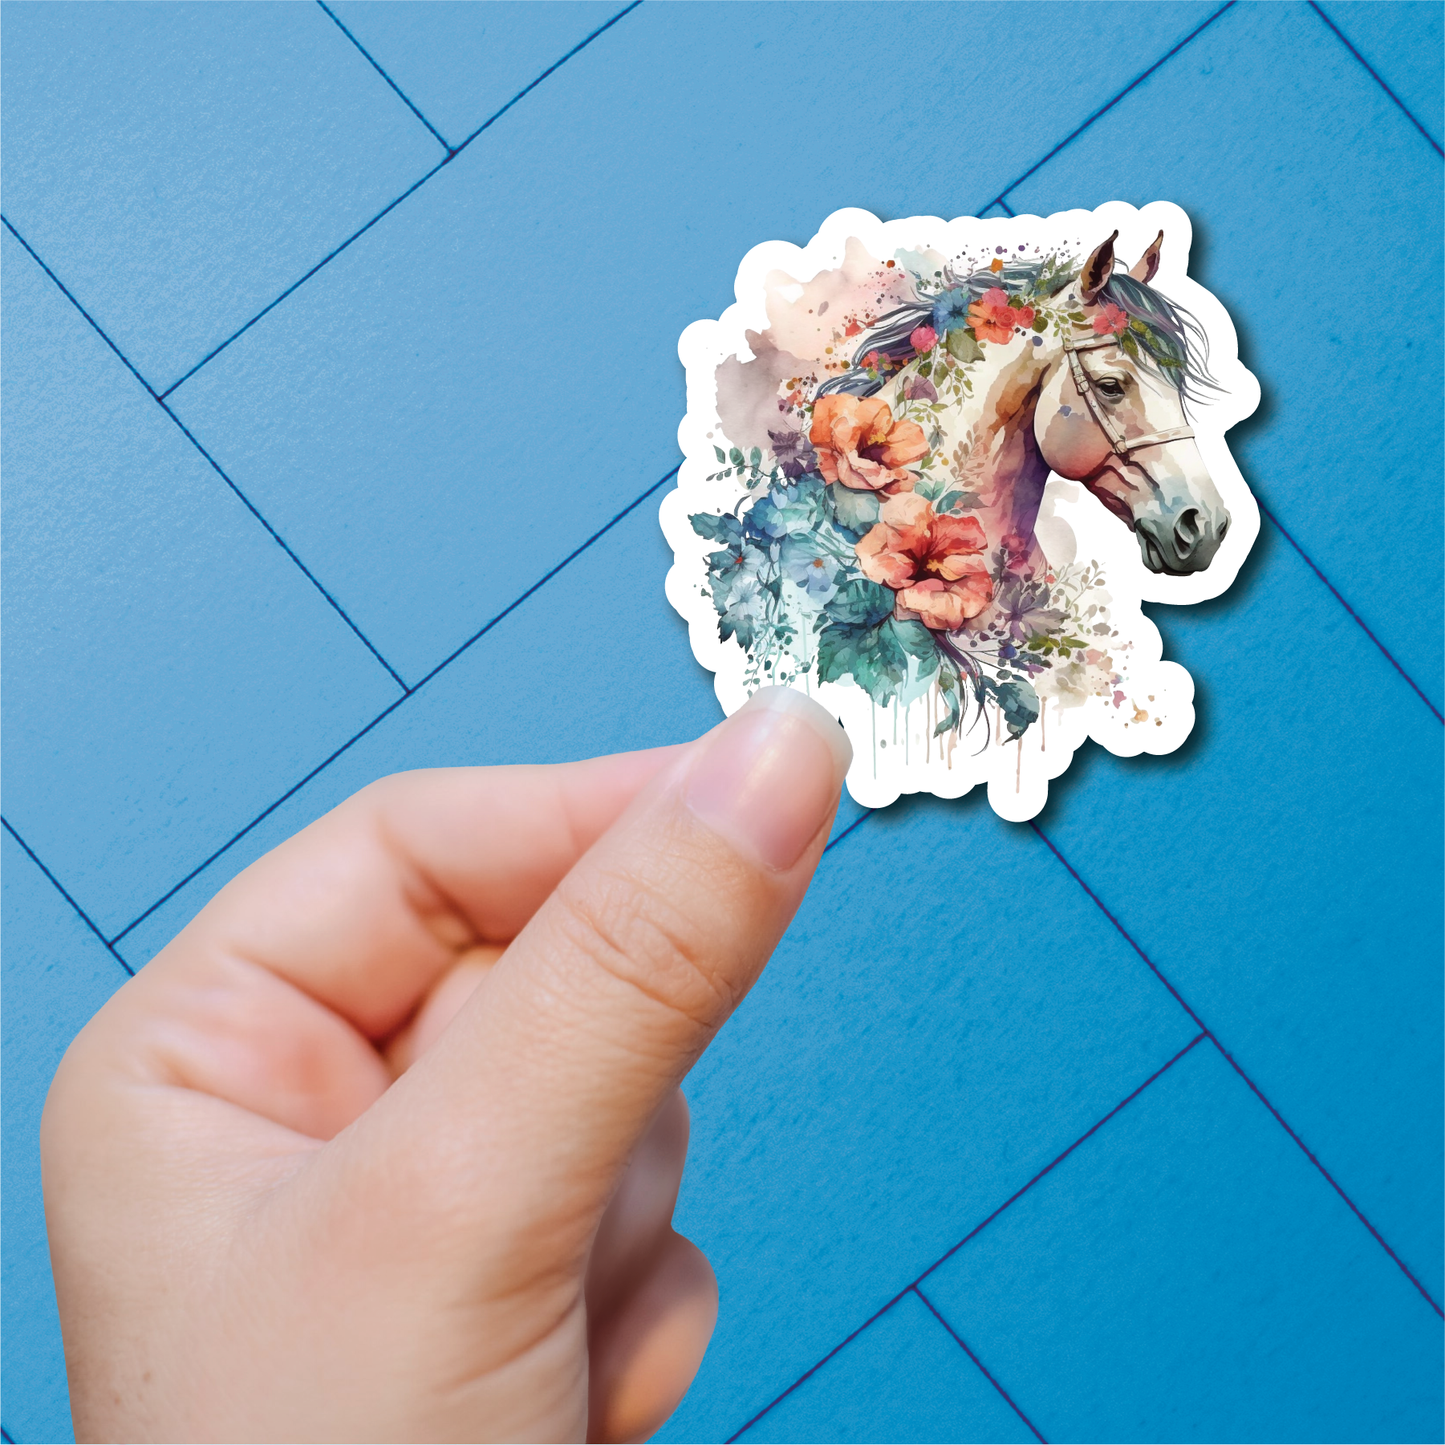 Beautiful Horses - Full Color Vinyl Stickers (SHIPS IN 3-7 BUS DAYS)